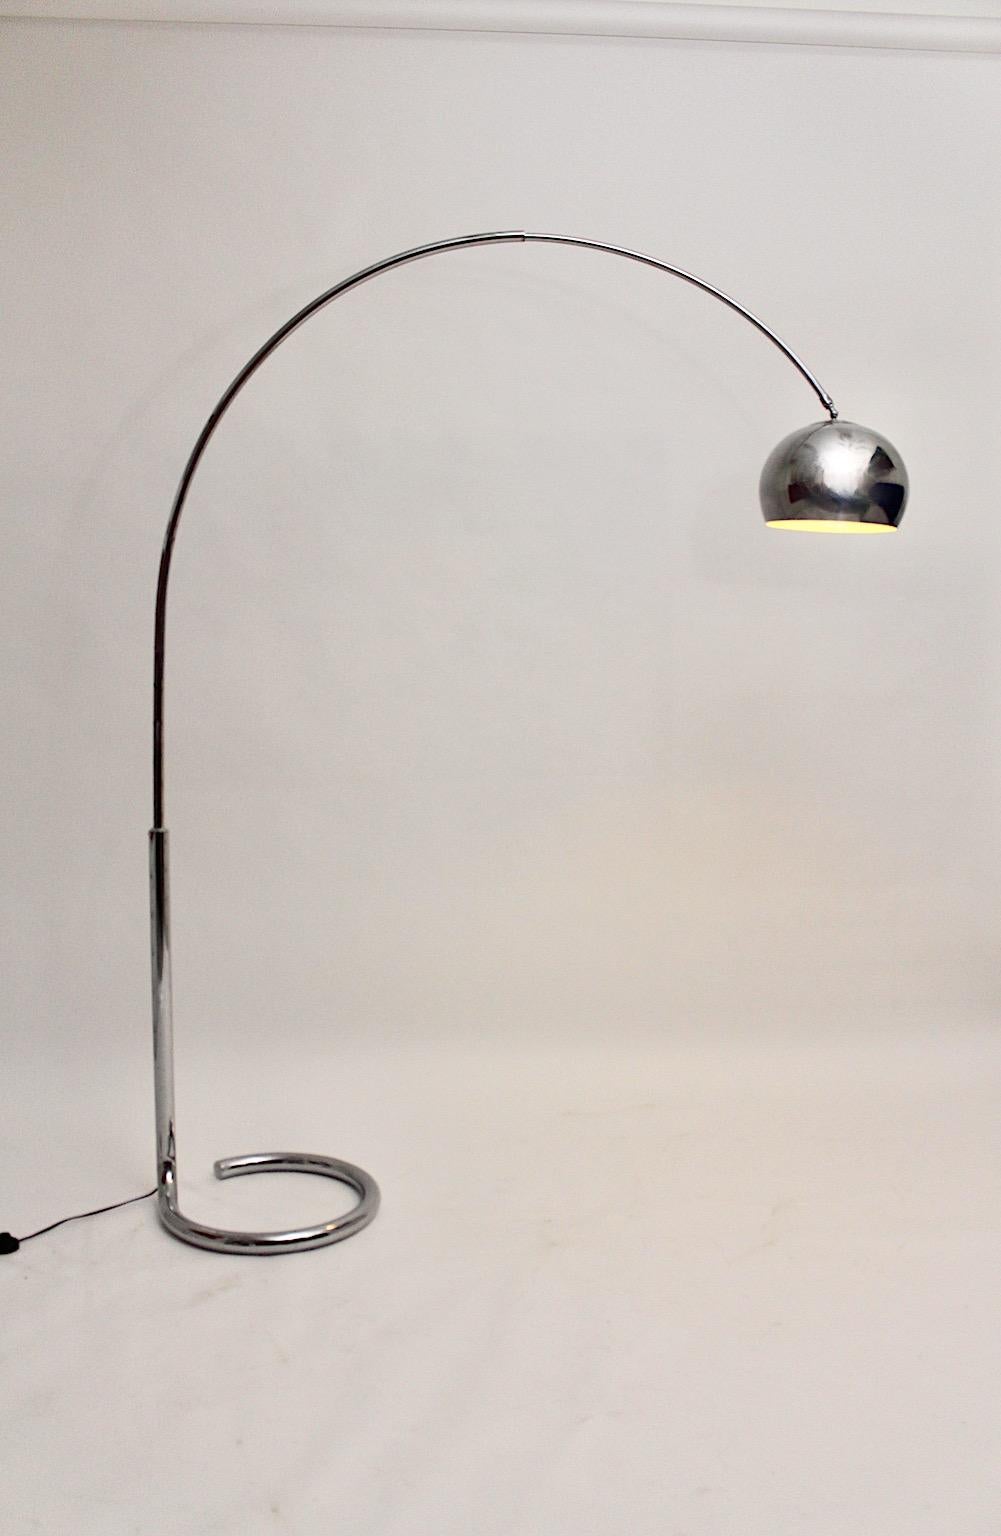 Space Age vintage chromed metal floor lamp with a curved base and a telescope arm from 1960s, Germany.
While the telescope tube arm is adjustable and swiveling, the lamp shade from chromed metal shows a beautiful shape and is movable, too.
Very